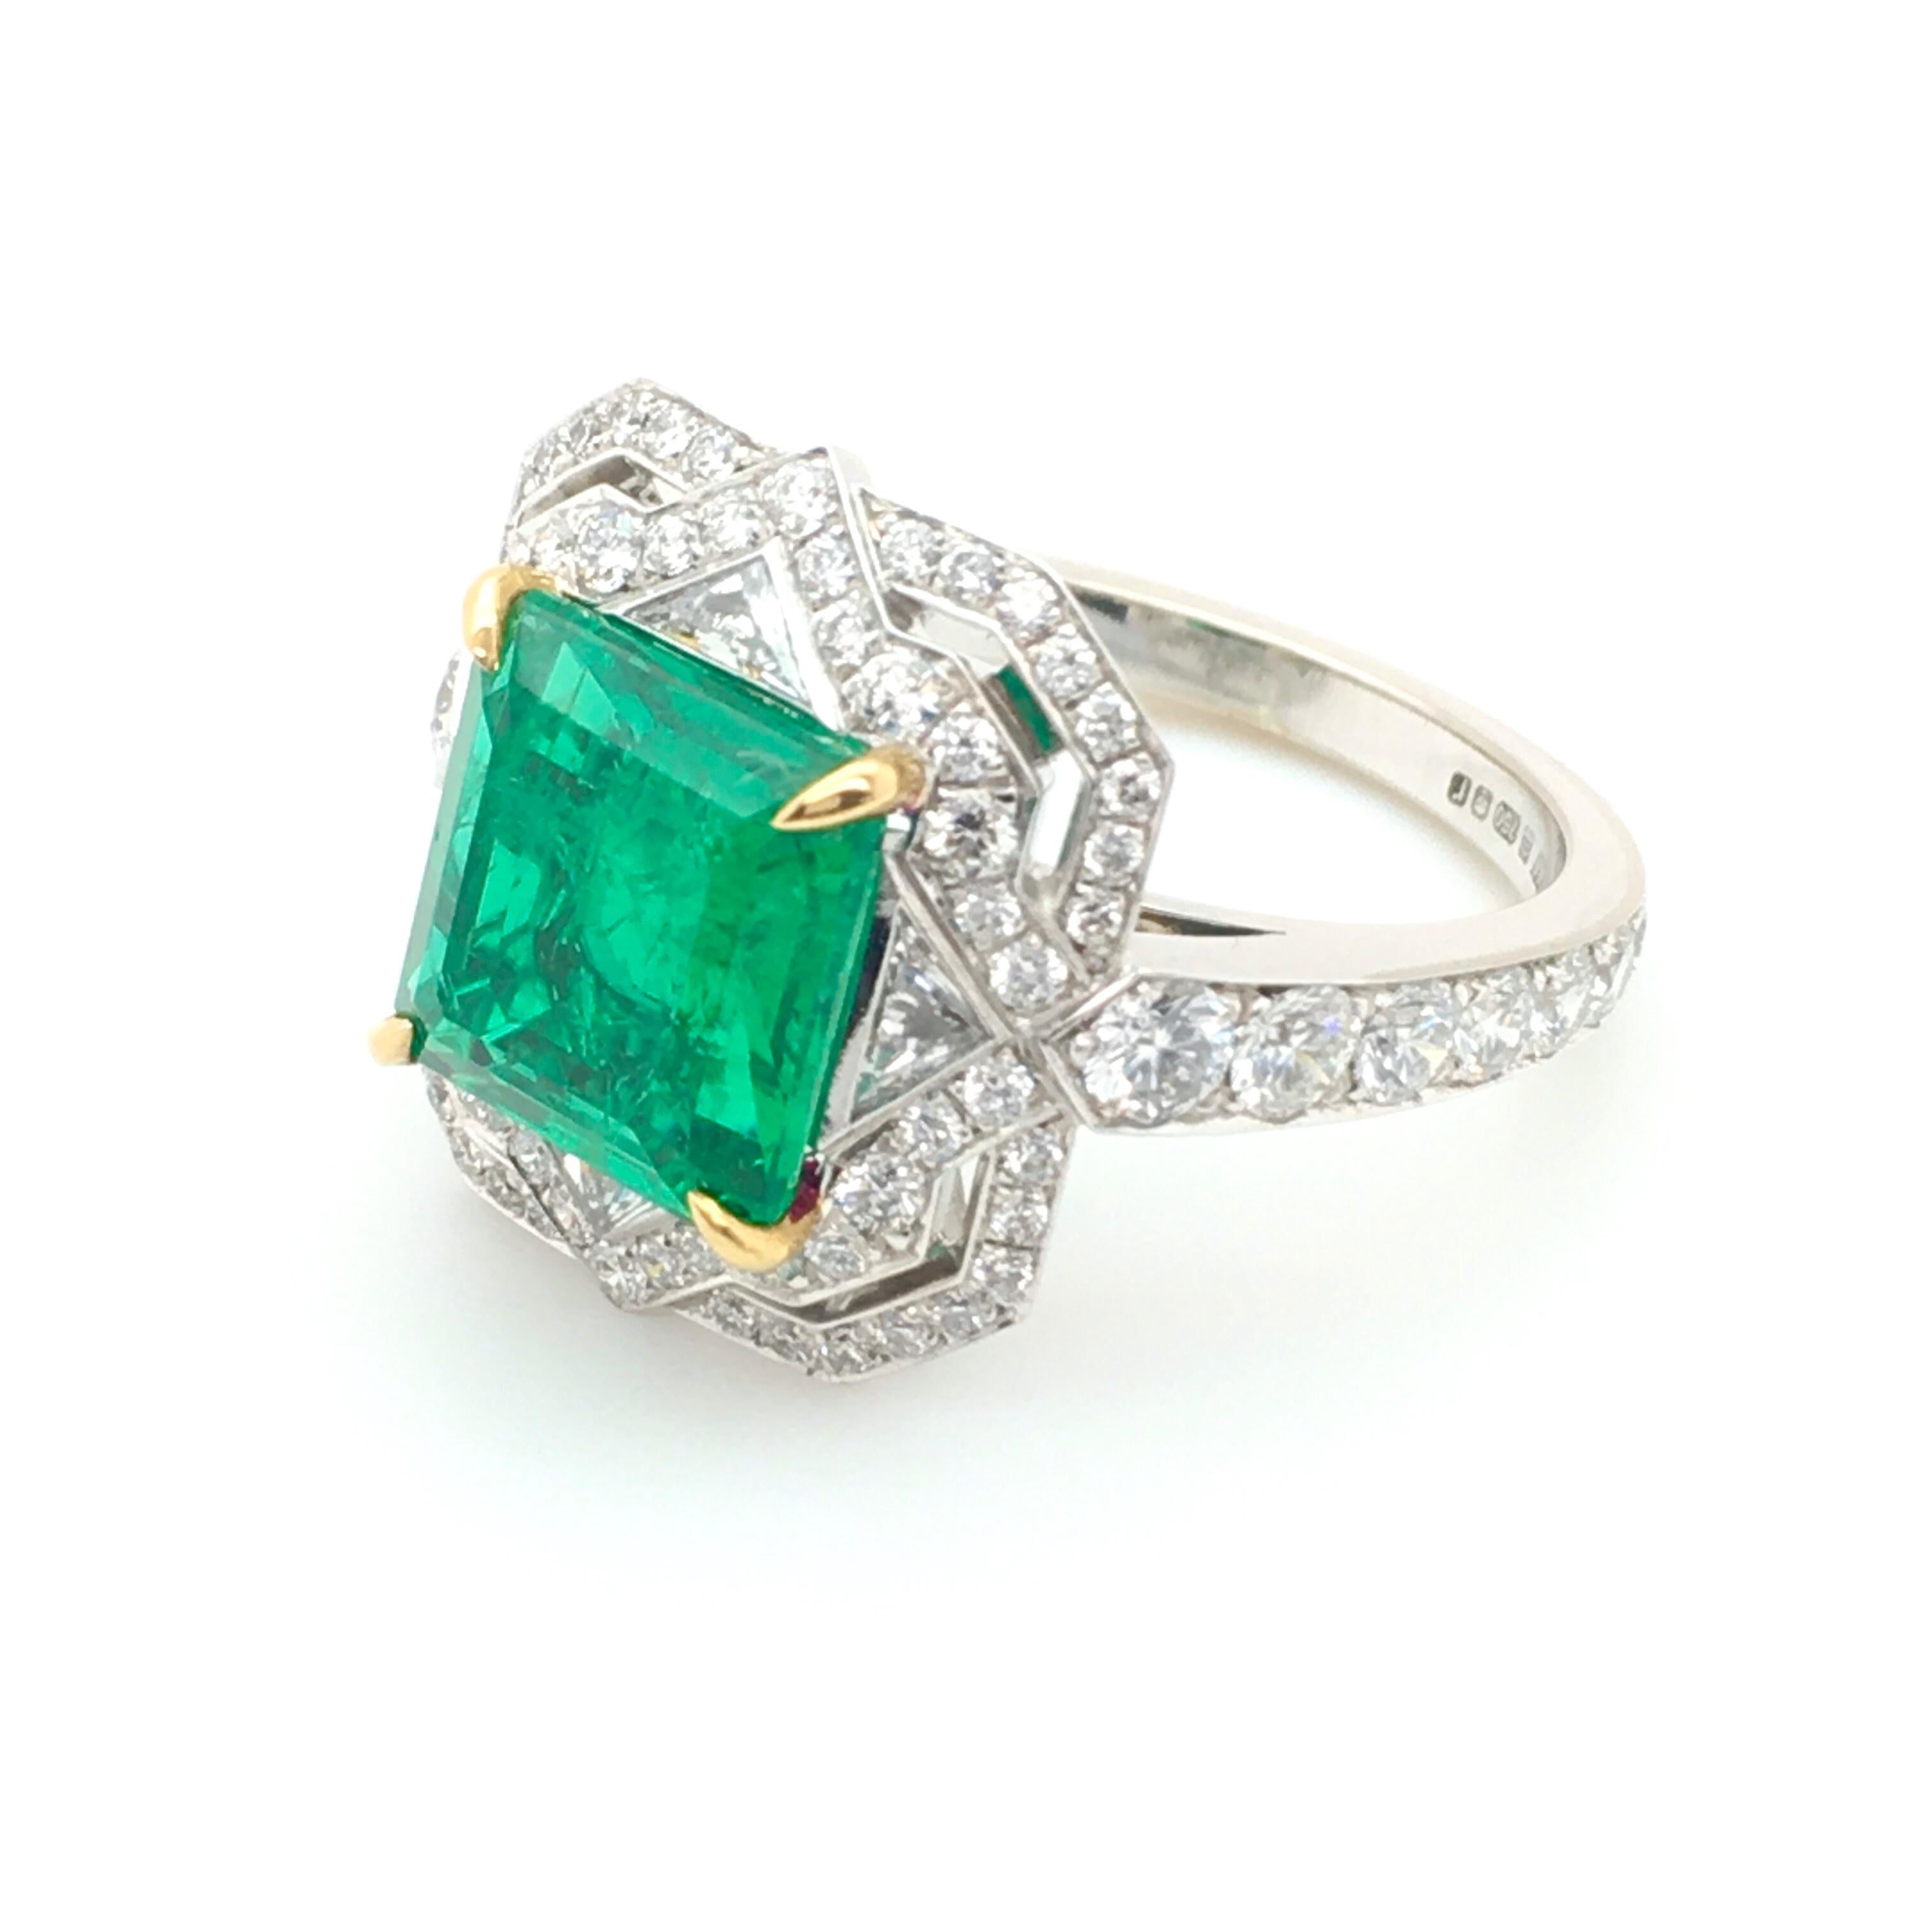 Women's or Men's 2.94 Carats Emerald Platinum Ring with White Diamond Halo in Art Deco Style For Sale